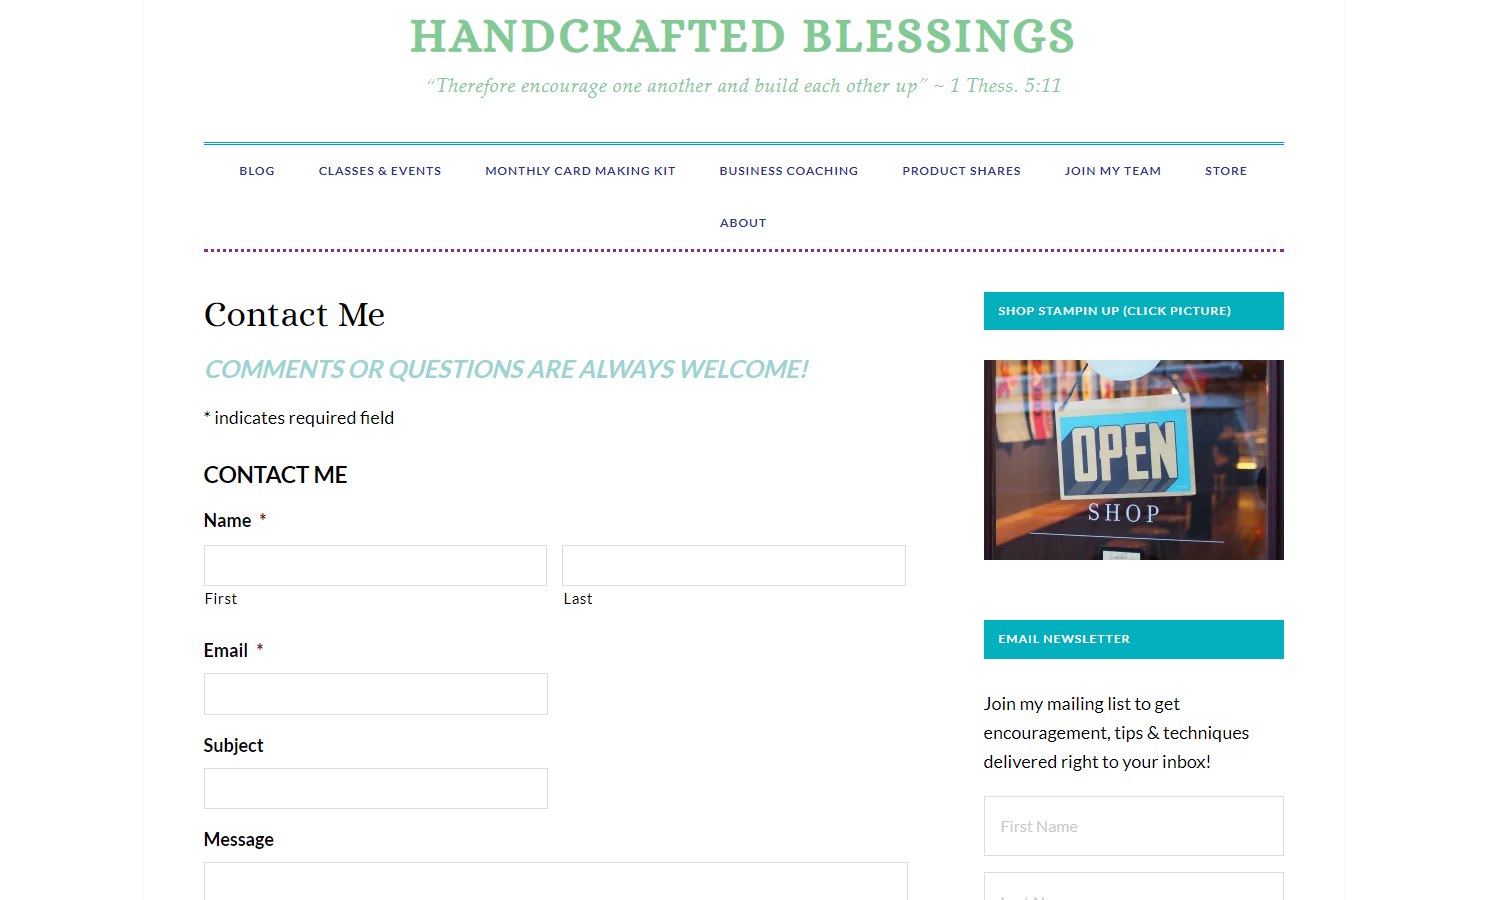 Handcrafted Blessings Web Design Contact Page